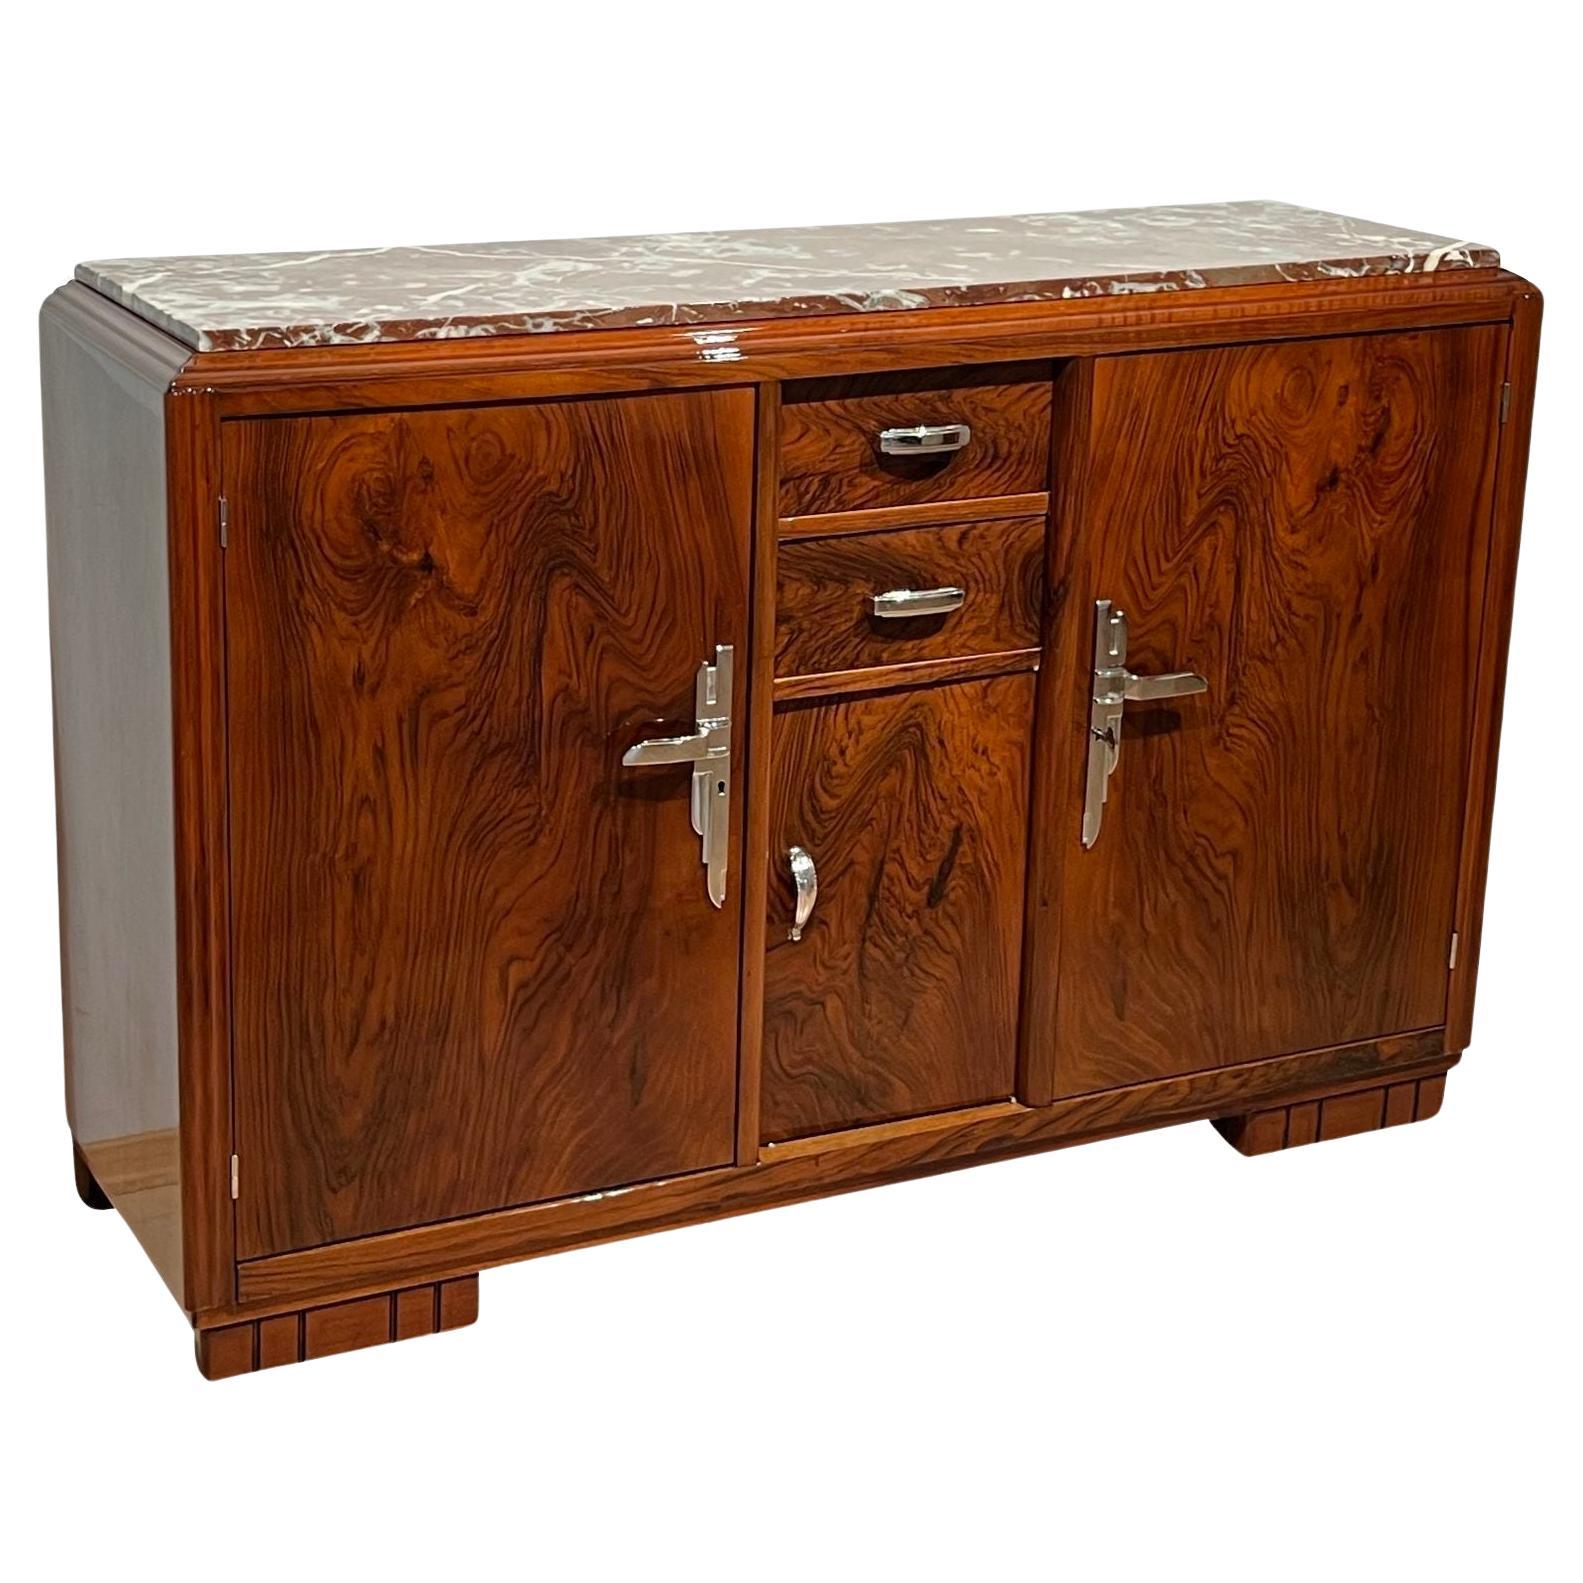 Art Deco Sideboard, Walnut, Lacquer, Nickel, France circa 1930 For Sale